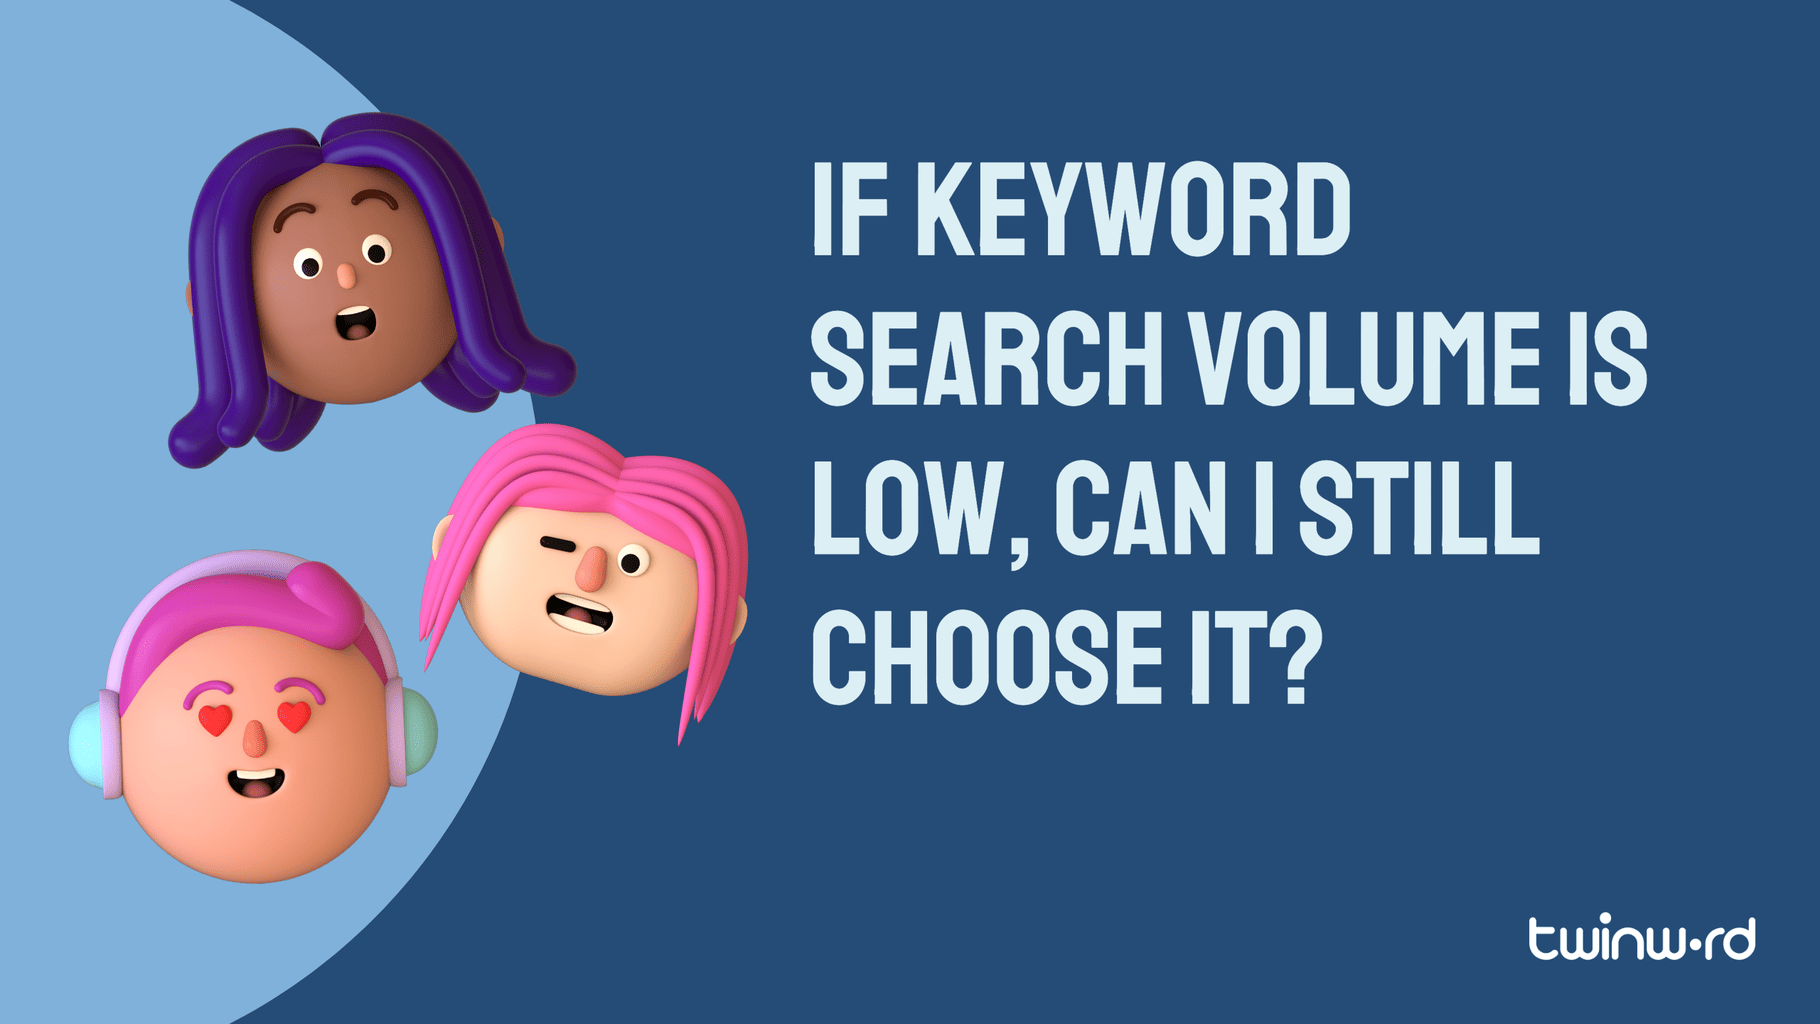 If Keyword Search Volume Is Low, Can I Still Choose It?